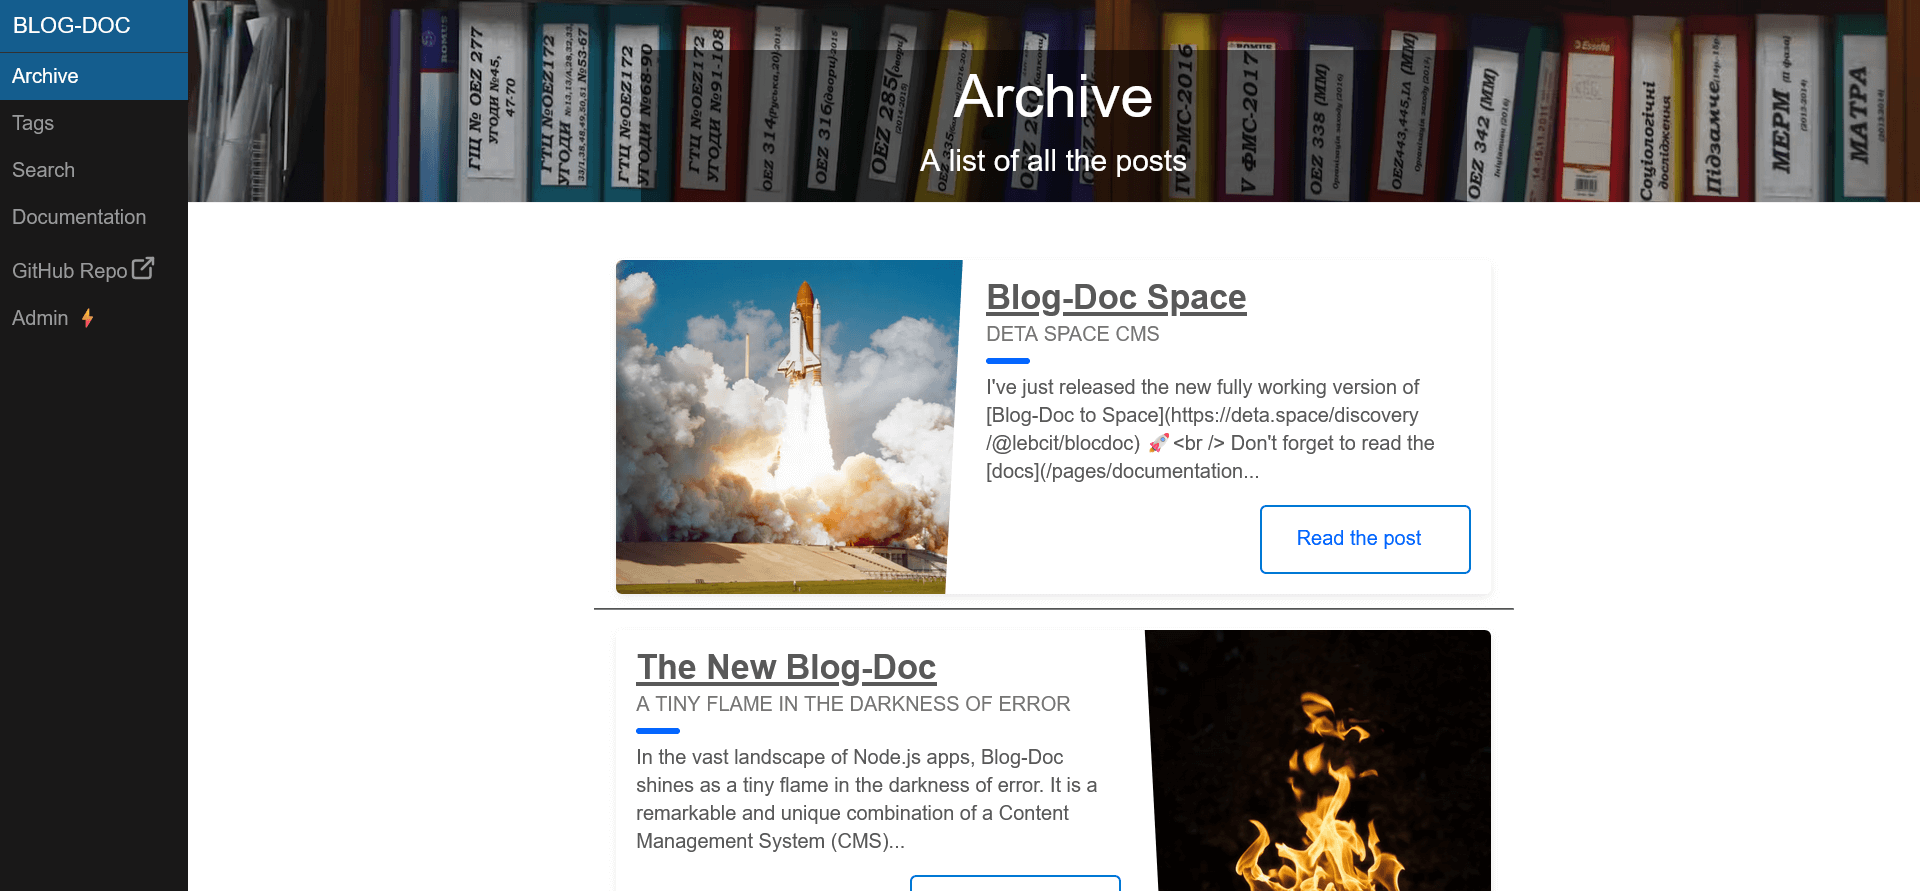 Screenshot of Blog-Doc archive page